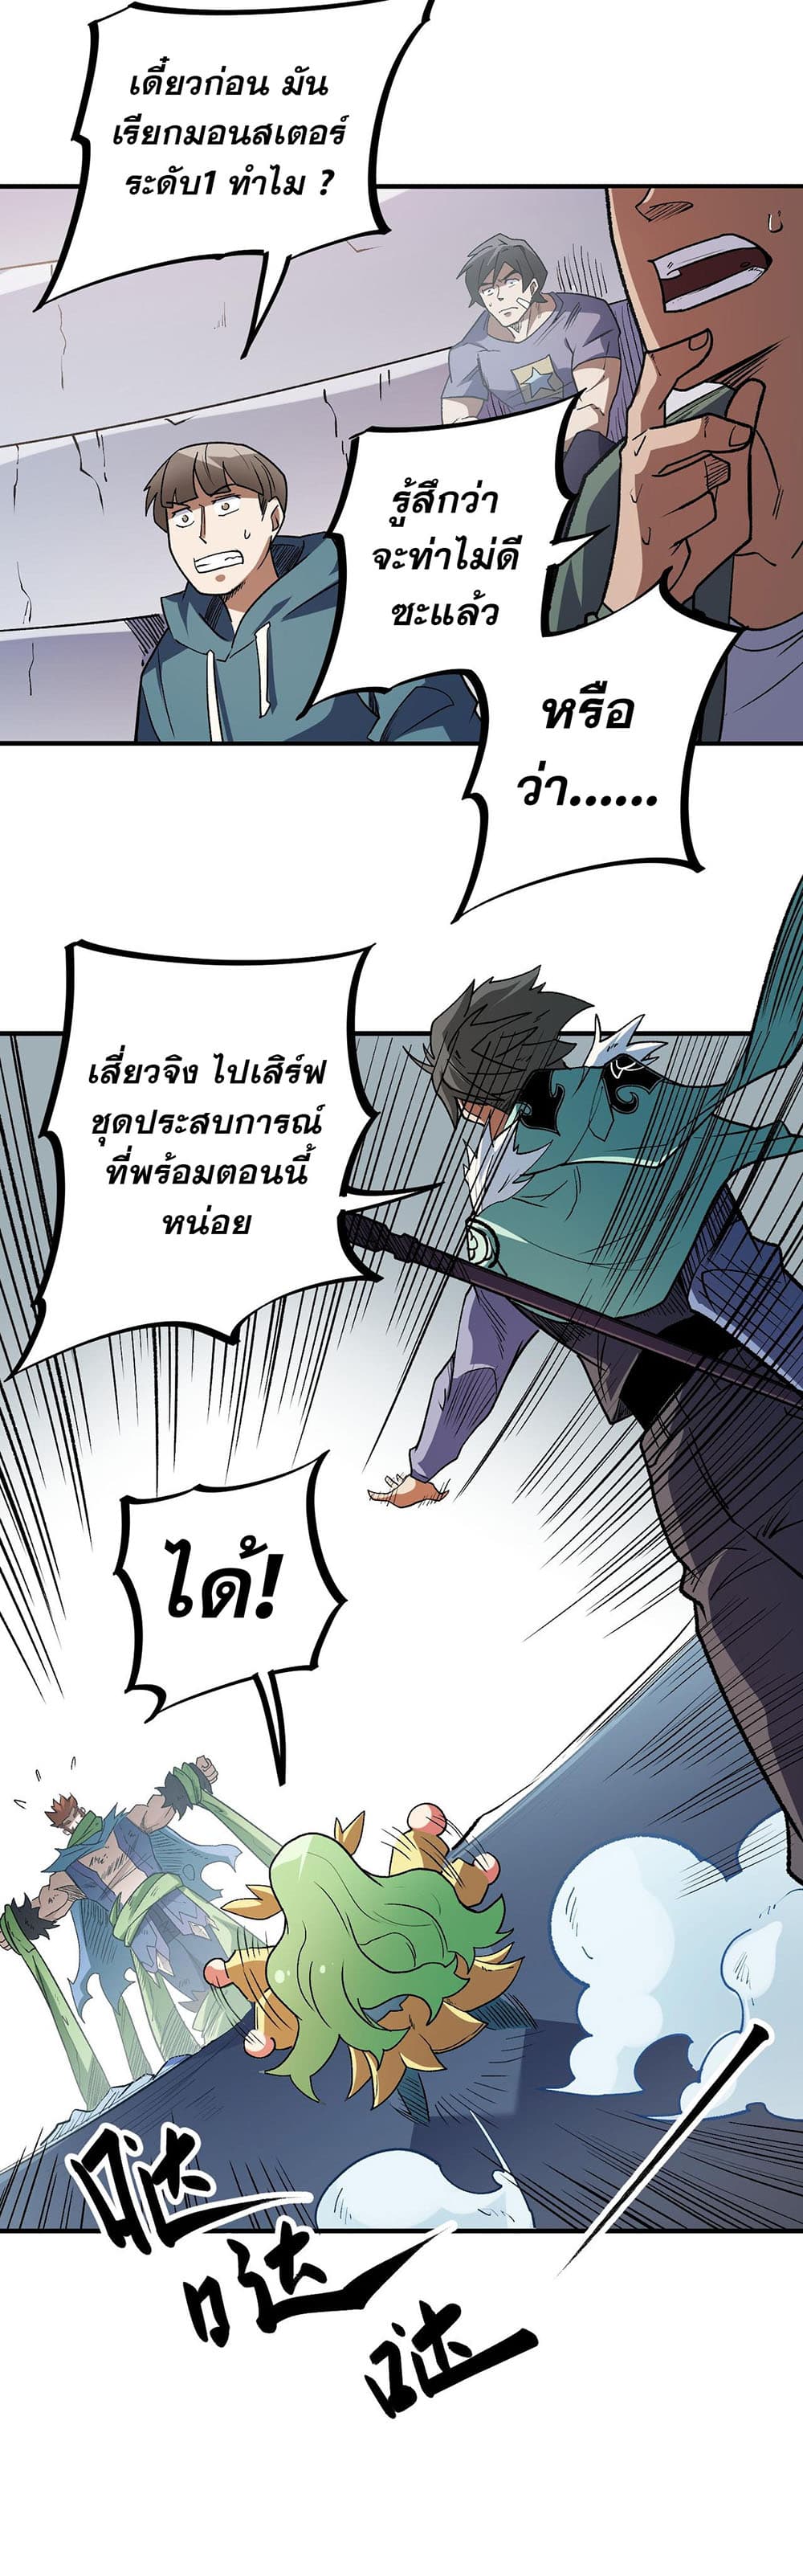 Job Changing for the Entire Population: The Jobless Me Will Terminate the Gods ฉันคือผู้เล่นไร้อาชีพที่สังหารเหล่าเทพ 29-29